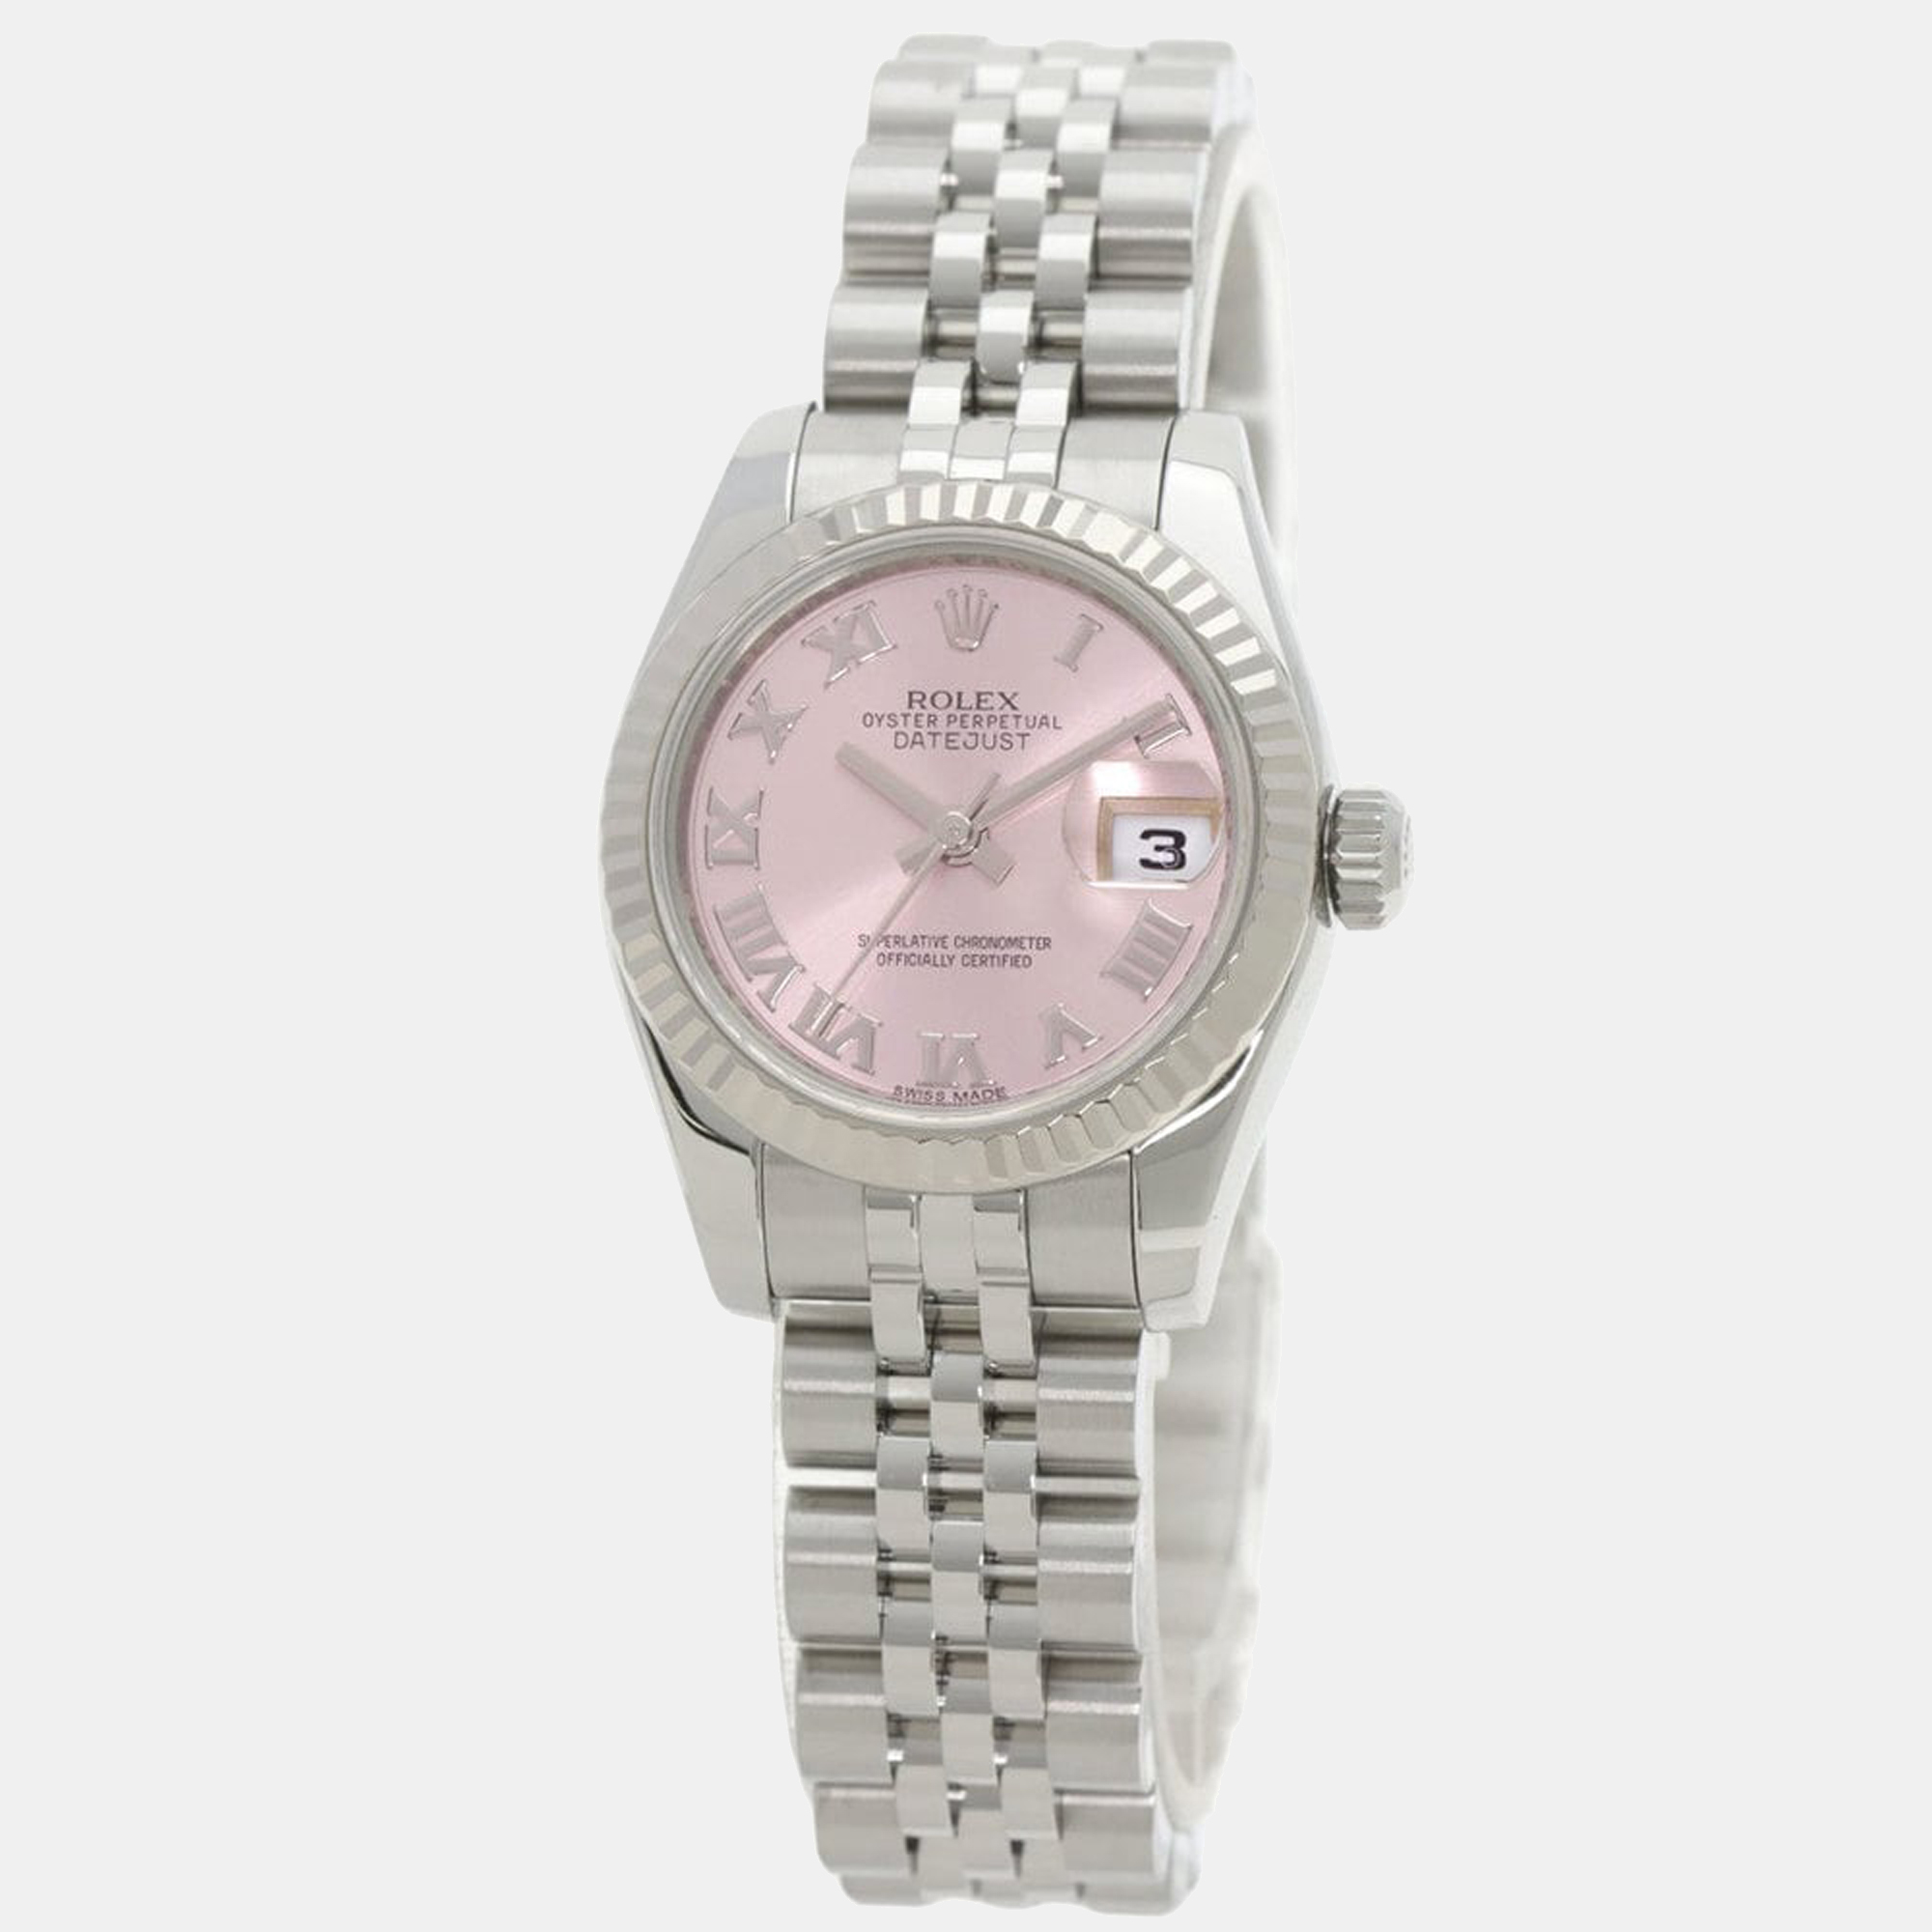 Rolex pink 18k white gold and stainless steel datejust 179174 women's wristwatch 26 mm